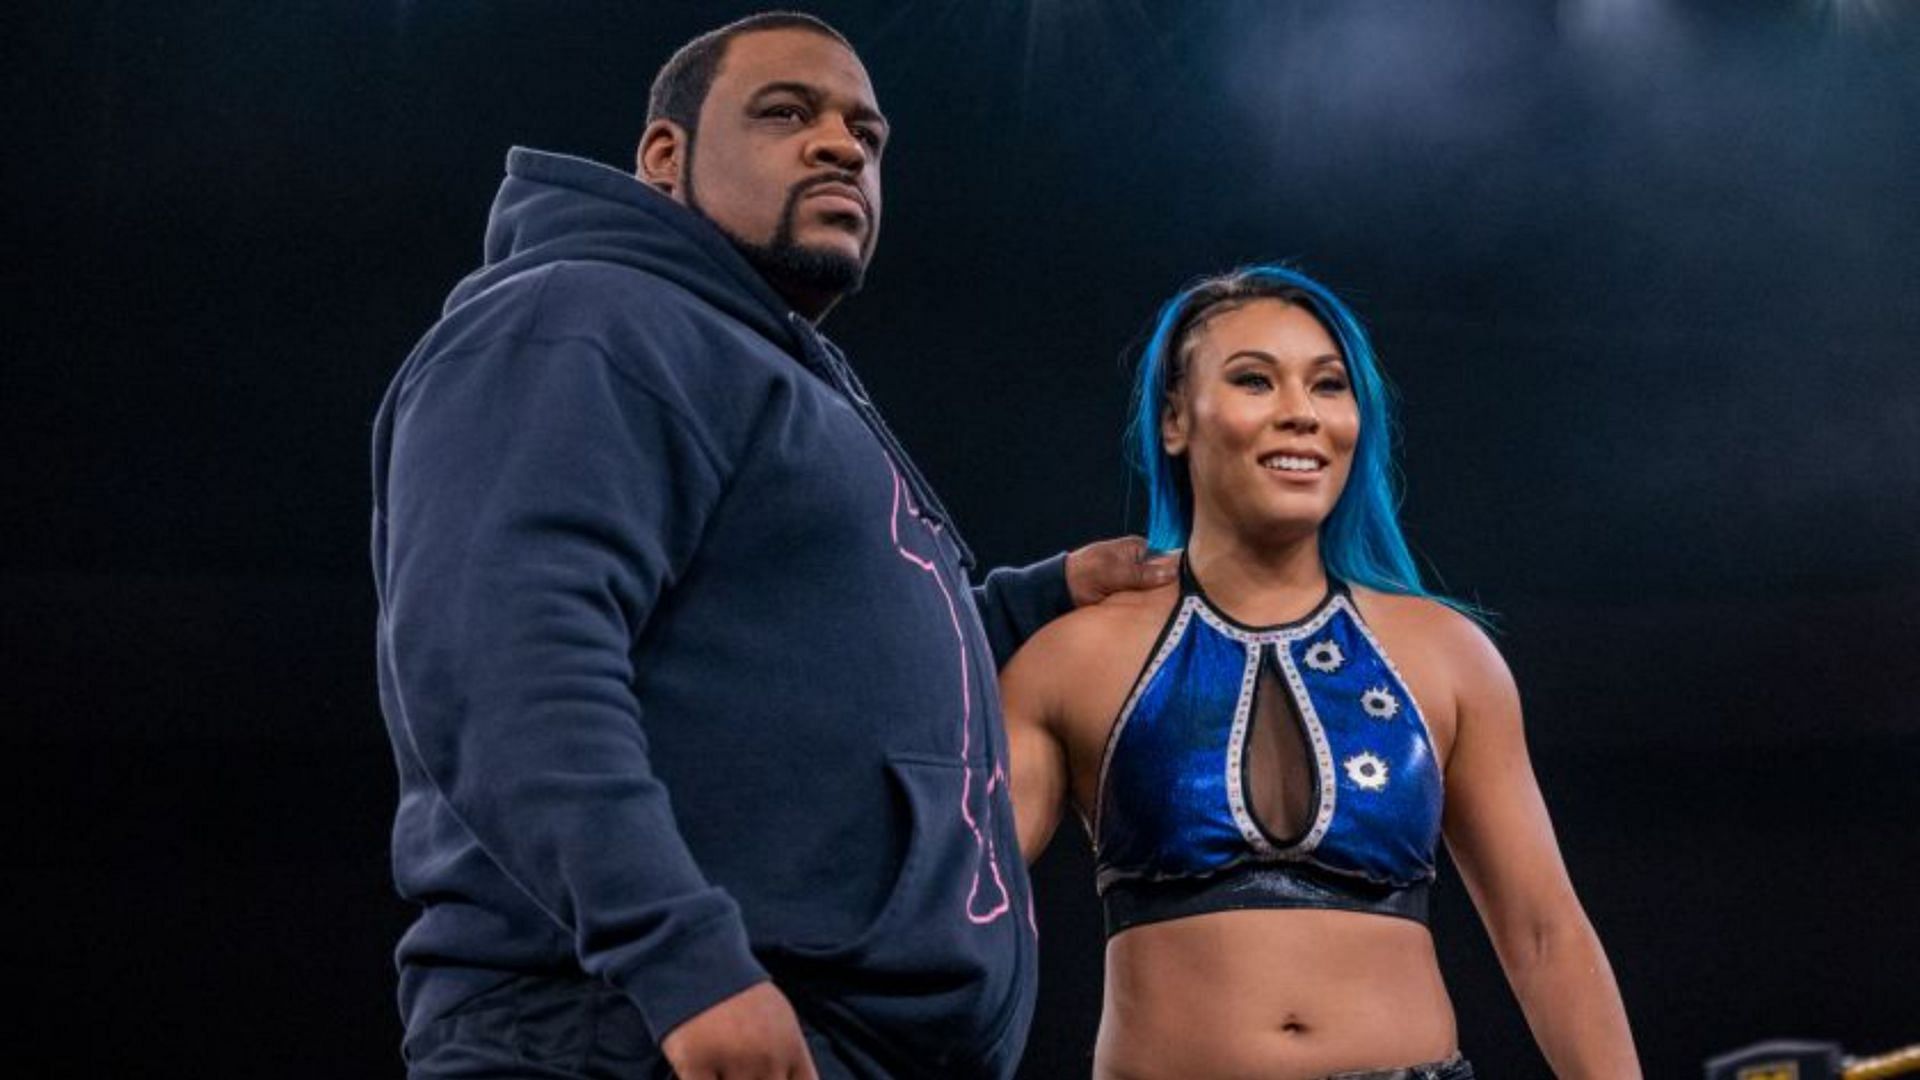 WWE released Mia Yim and Keith Lee in November 2021